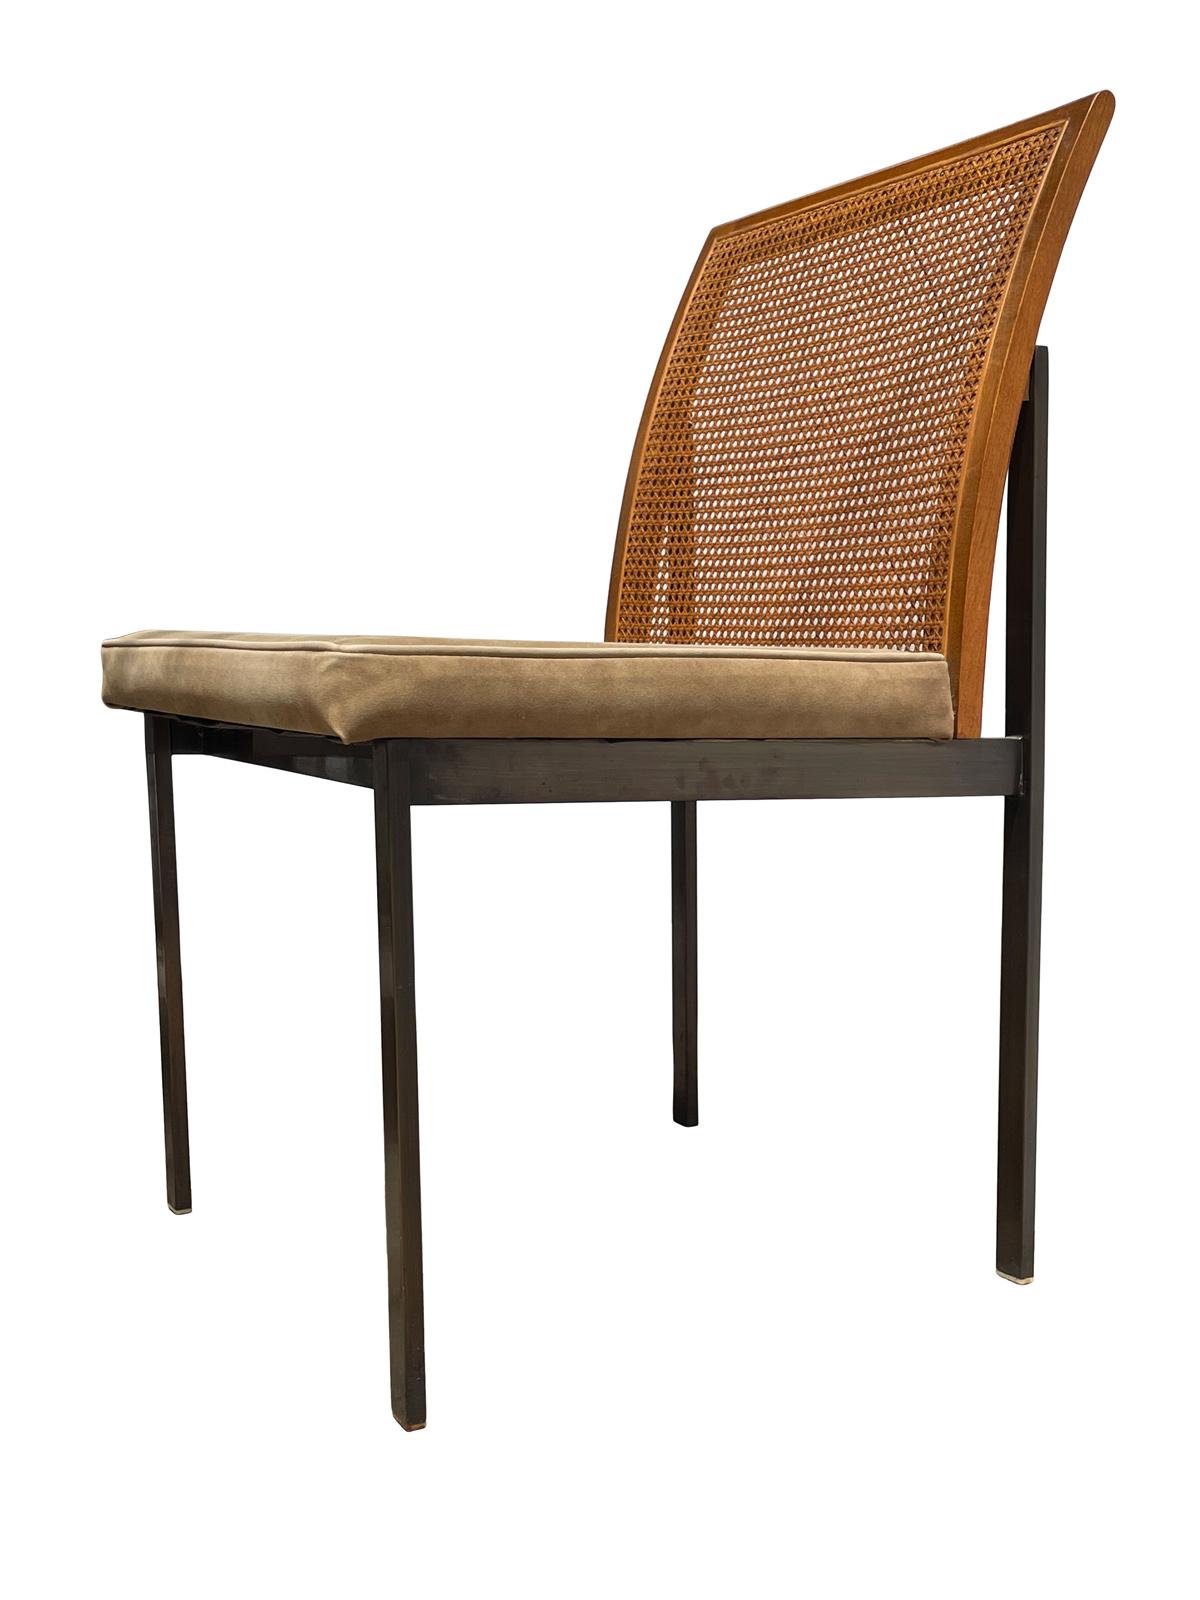 Stunning set of six dining chairs designed by Paul McCobb for Lane. The set consists of two arm chairs and four side chairs.